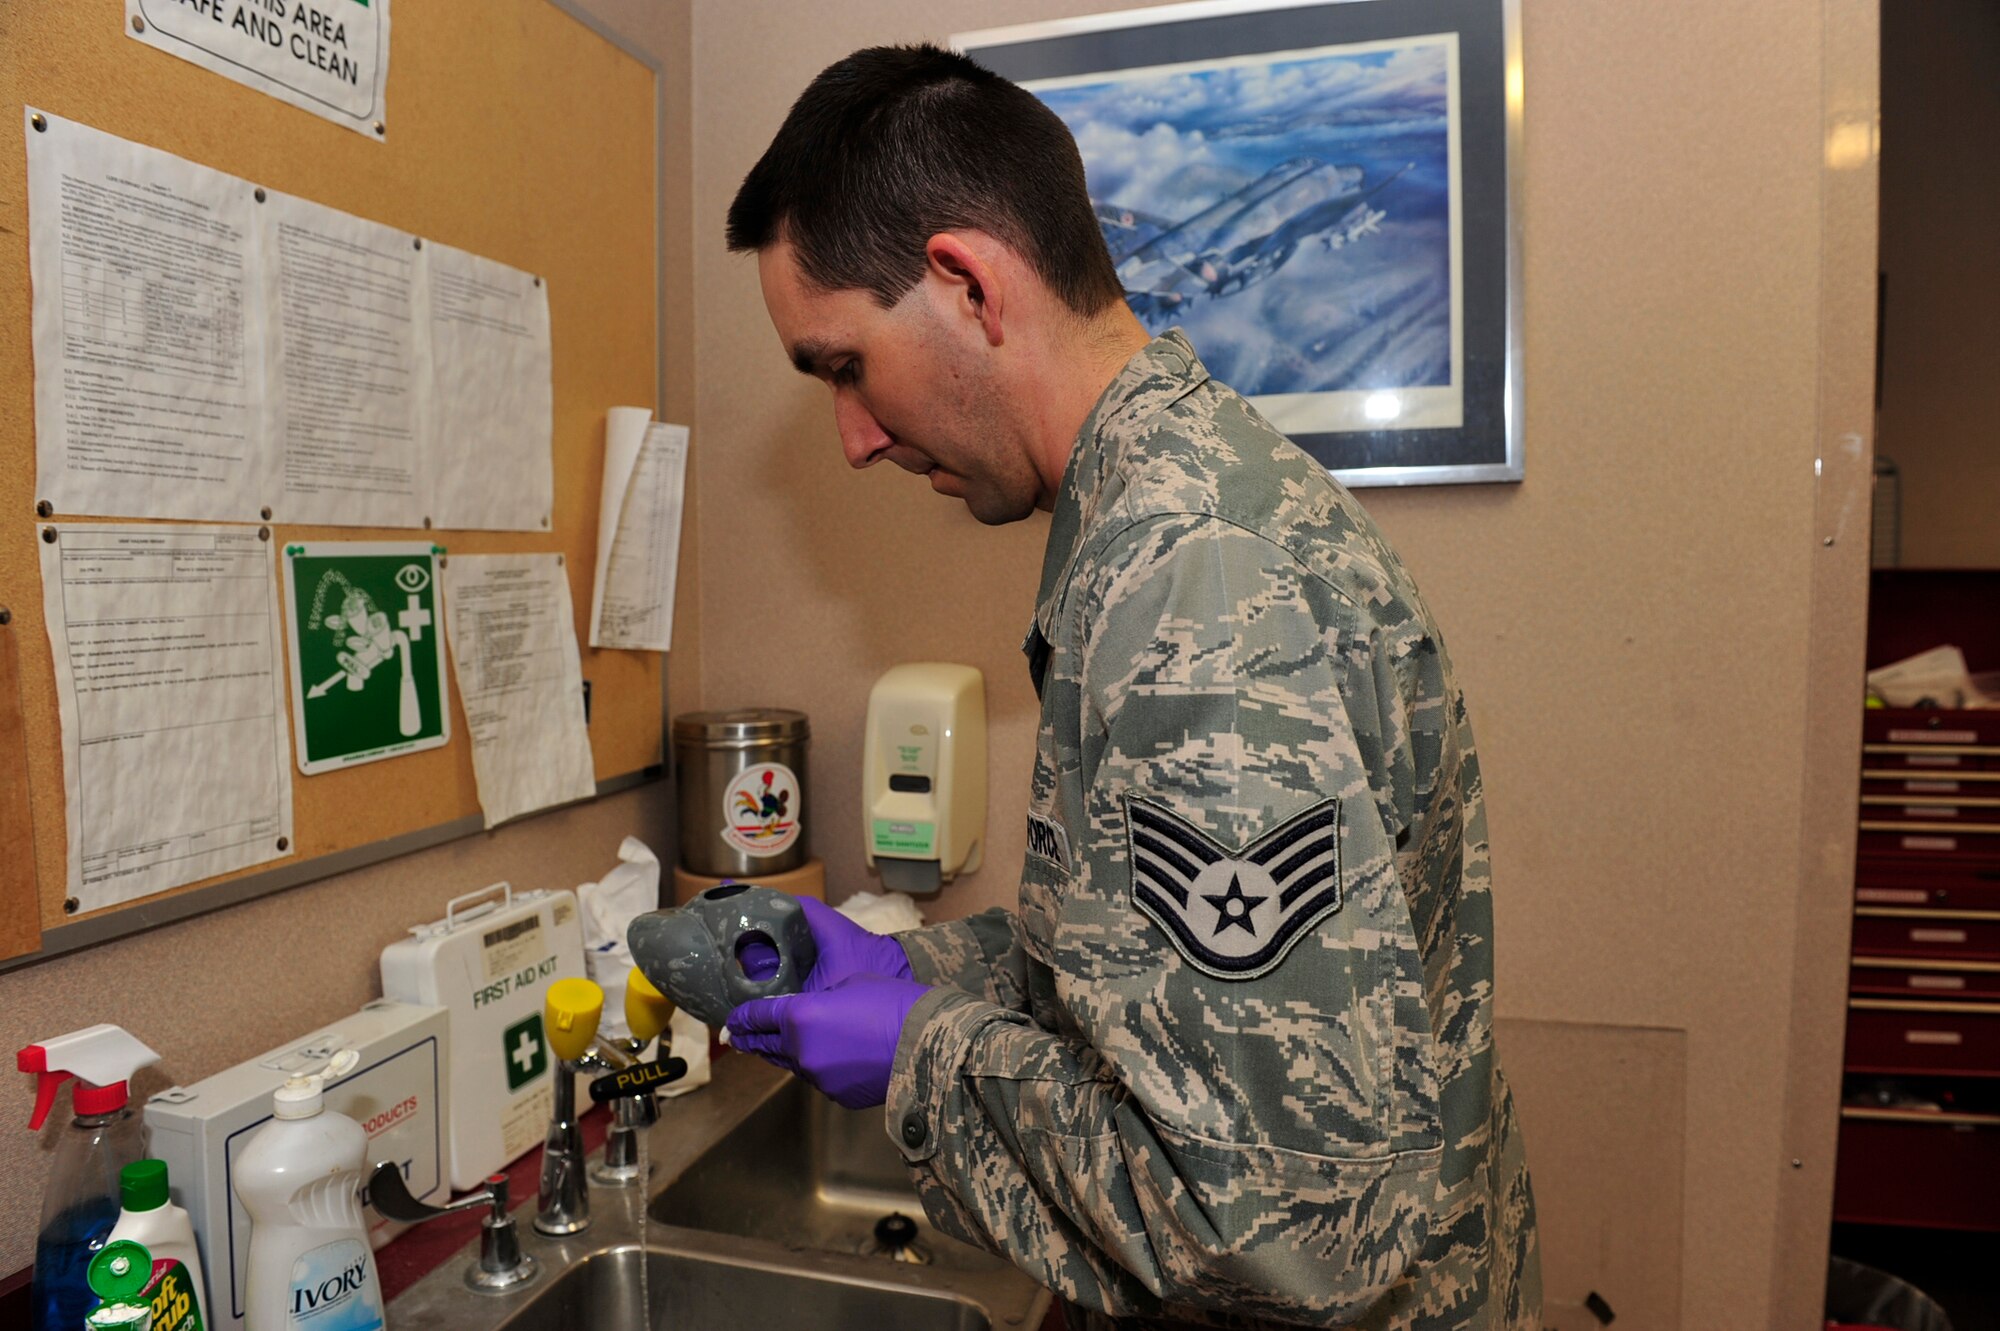 United States Air Force Staff Sgt. Nathan Davis, an aircrew flight equipment technician with the 18th Operations Support Squadron, Kadena Air Force Base, Japan, cleans the face mask of an HGU-55p helmet while conducting a periodic inspection during the Northern Edge Premier Joint Training Exercise, at Eielson Air Force Base, Alaska, June 21. More than 6,000 active duty, National Guard and Reserve Airmen receive training that prepares them for real-world missions during the exercise.   (U.S. Air Force photo/Staff Sgt. Lakisha A. Croley)